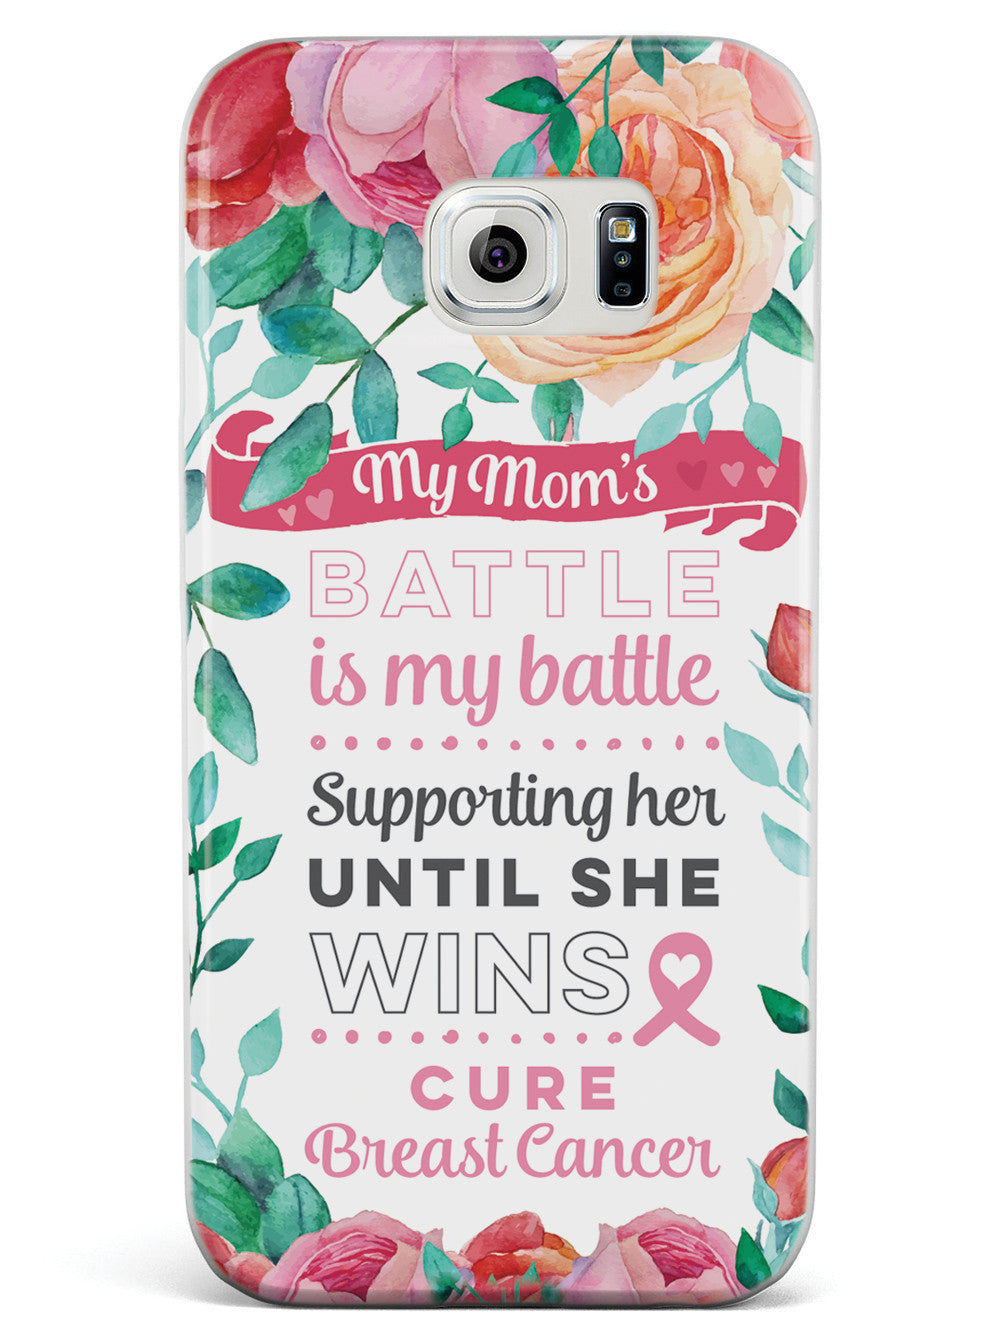 My Mom's Battle - Breast Cancer Awareness Case